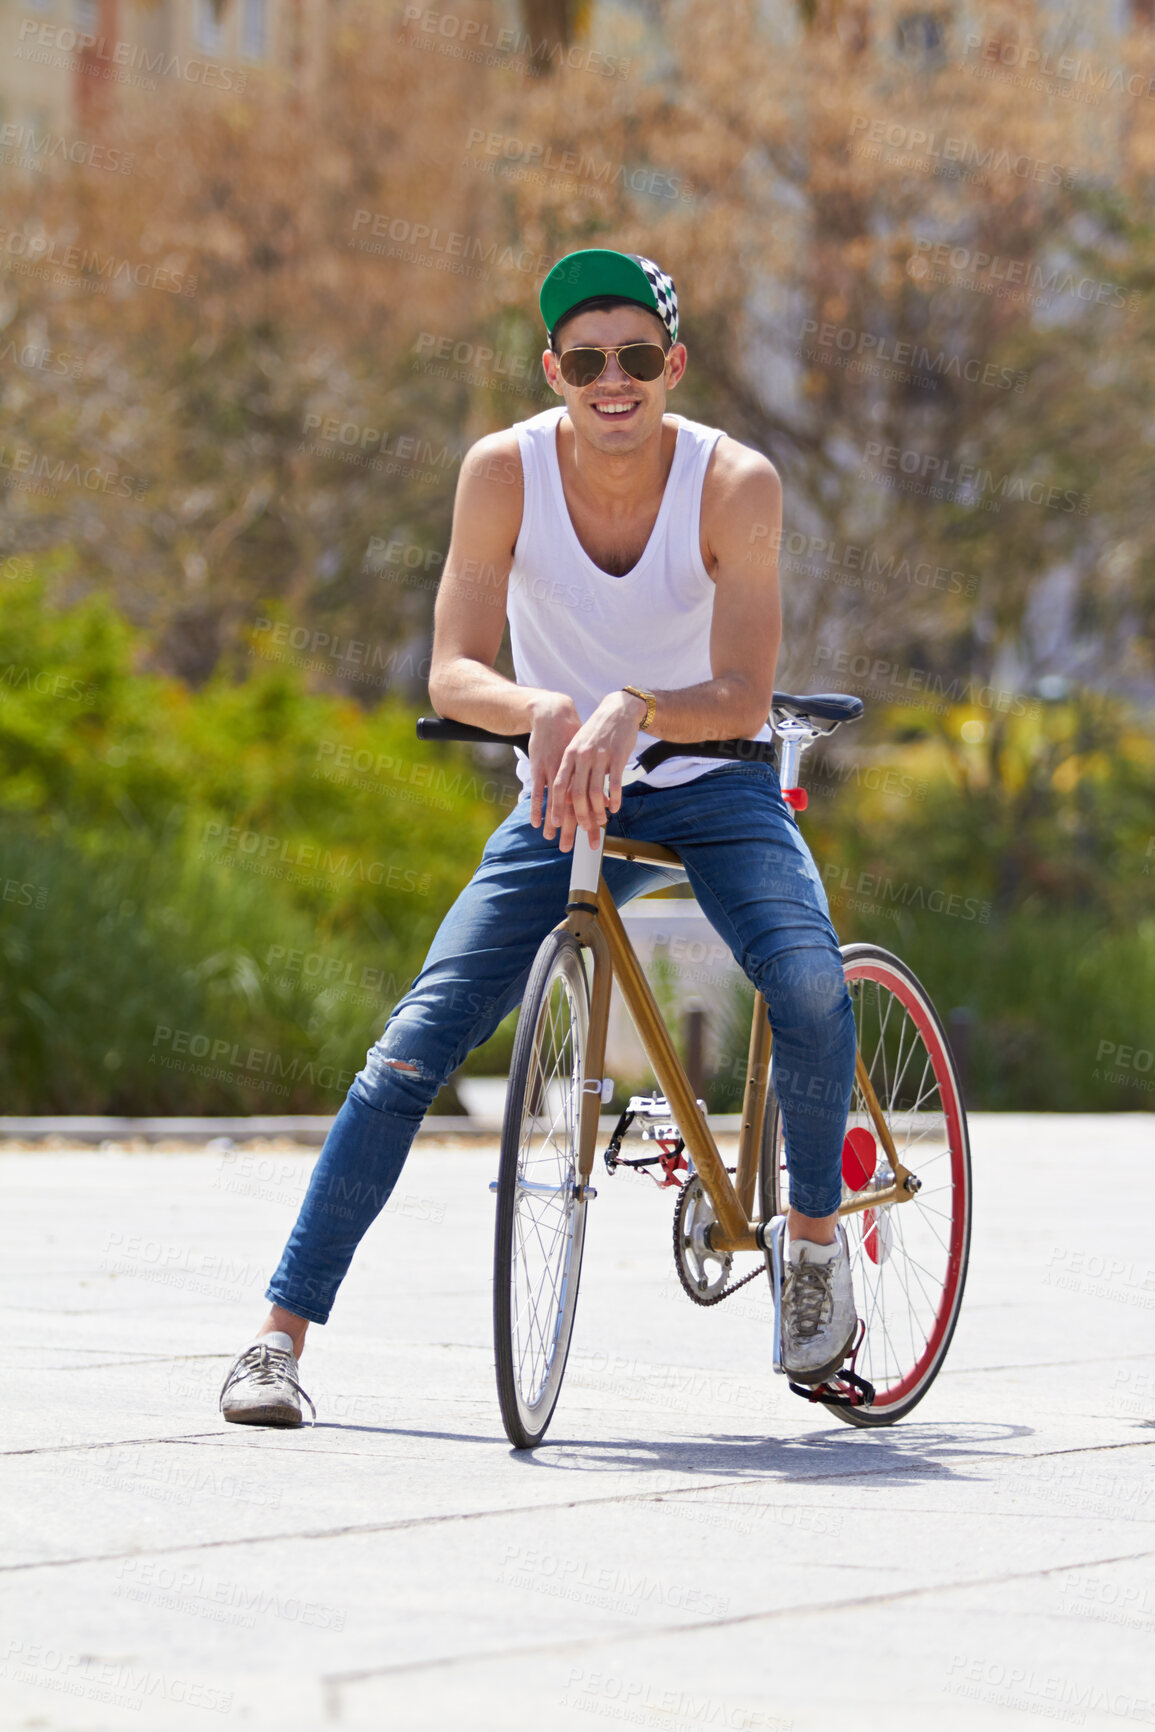 Buy stock photo A handsome young man riding his bicycle outdoors